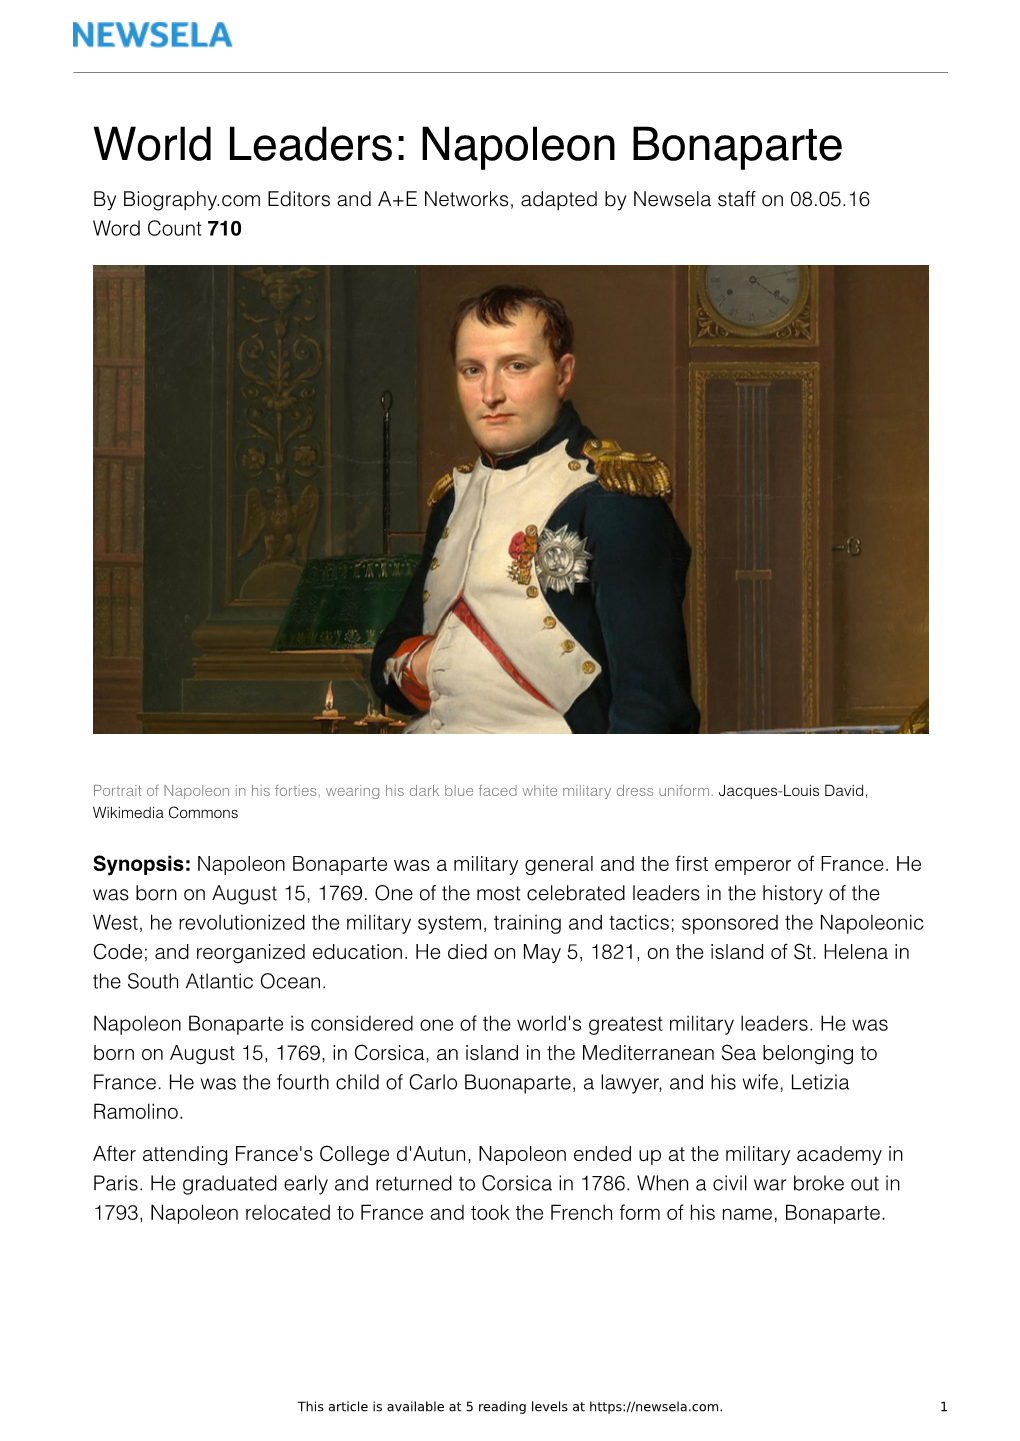 Napoleon Bonaparte by Biography.Com Editors and A+E Networks, Adapted by Newsela Staff on 08.05.16 Word Count 710